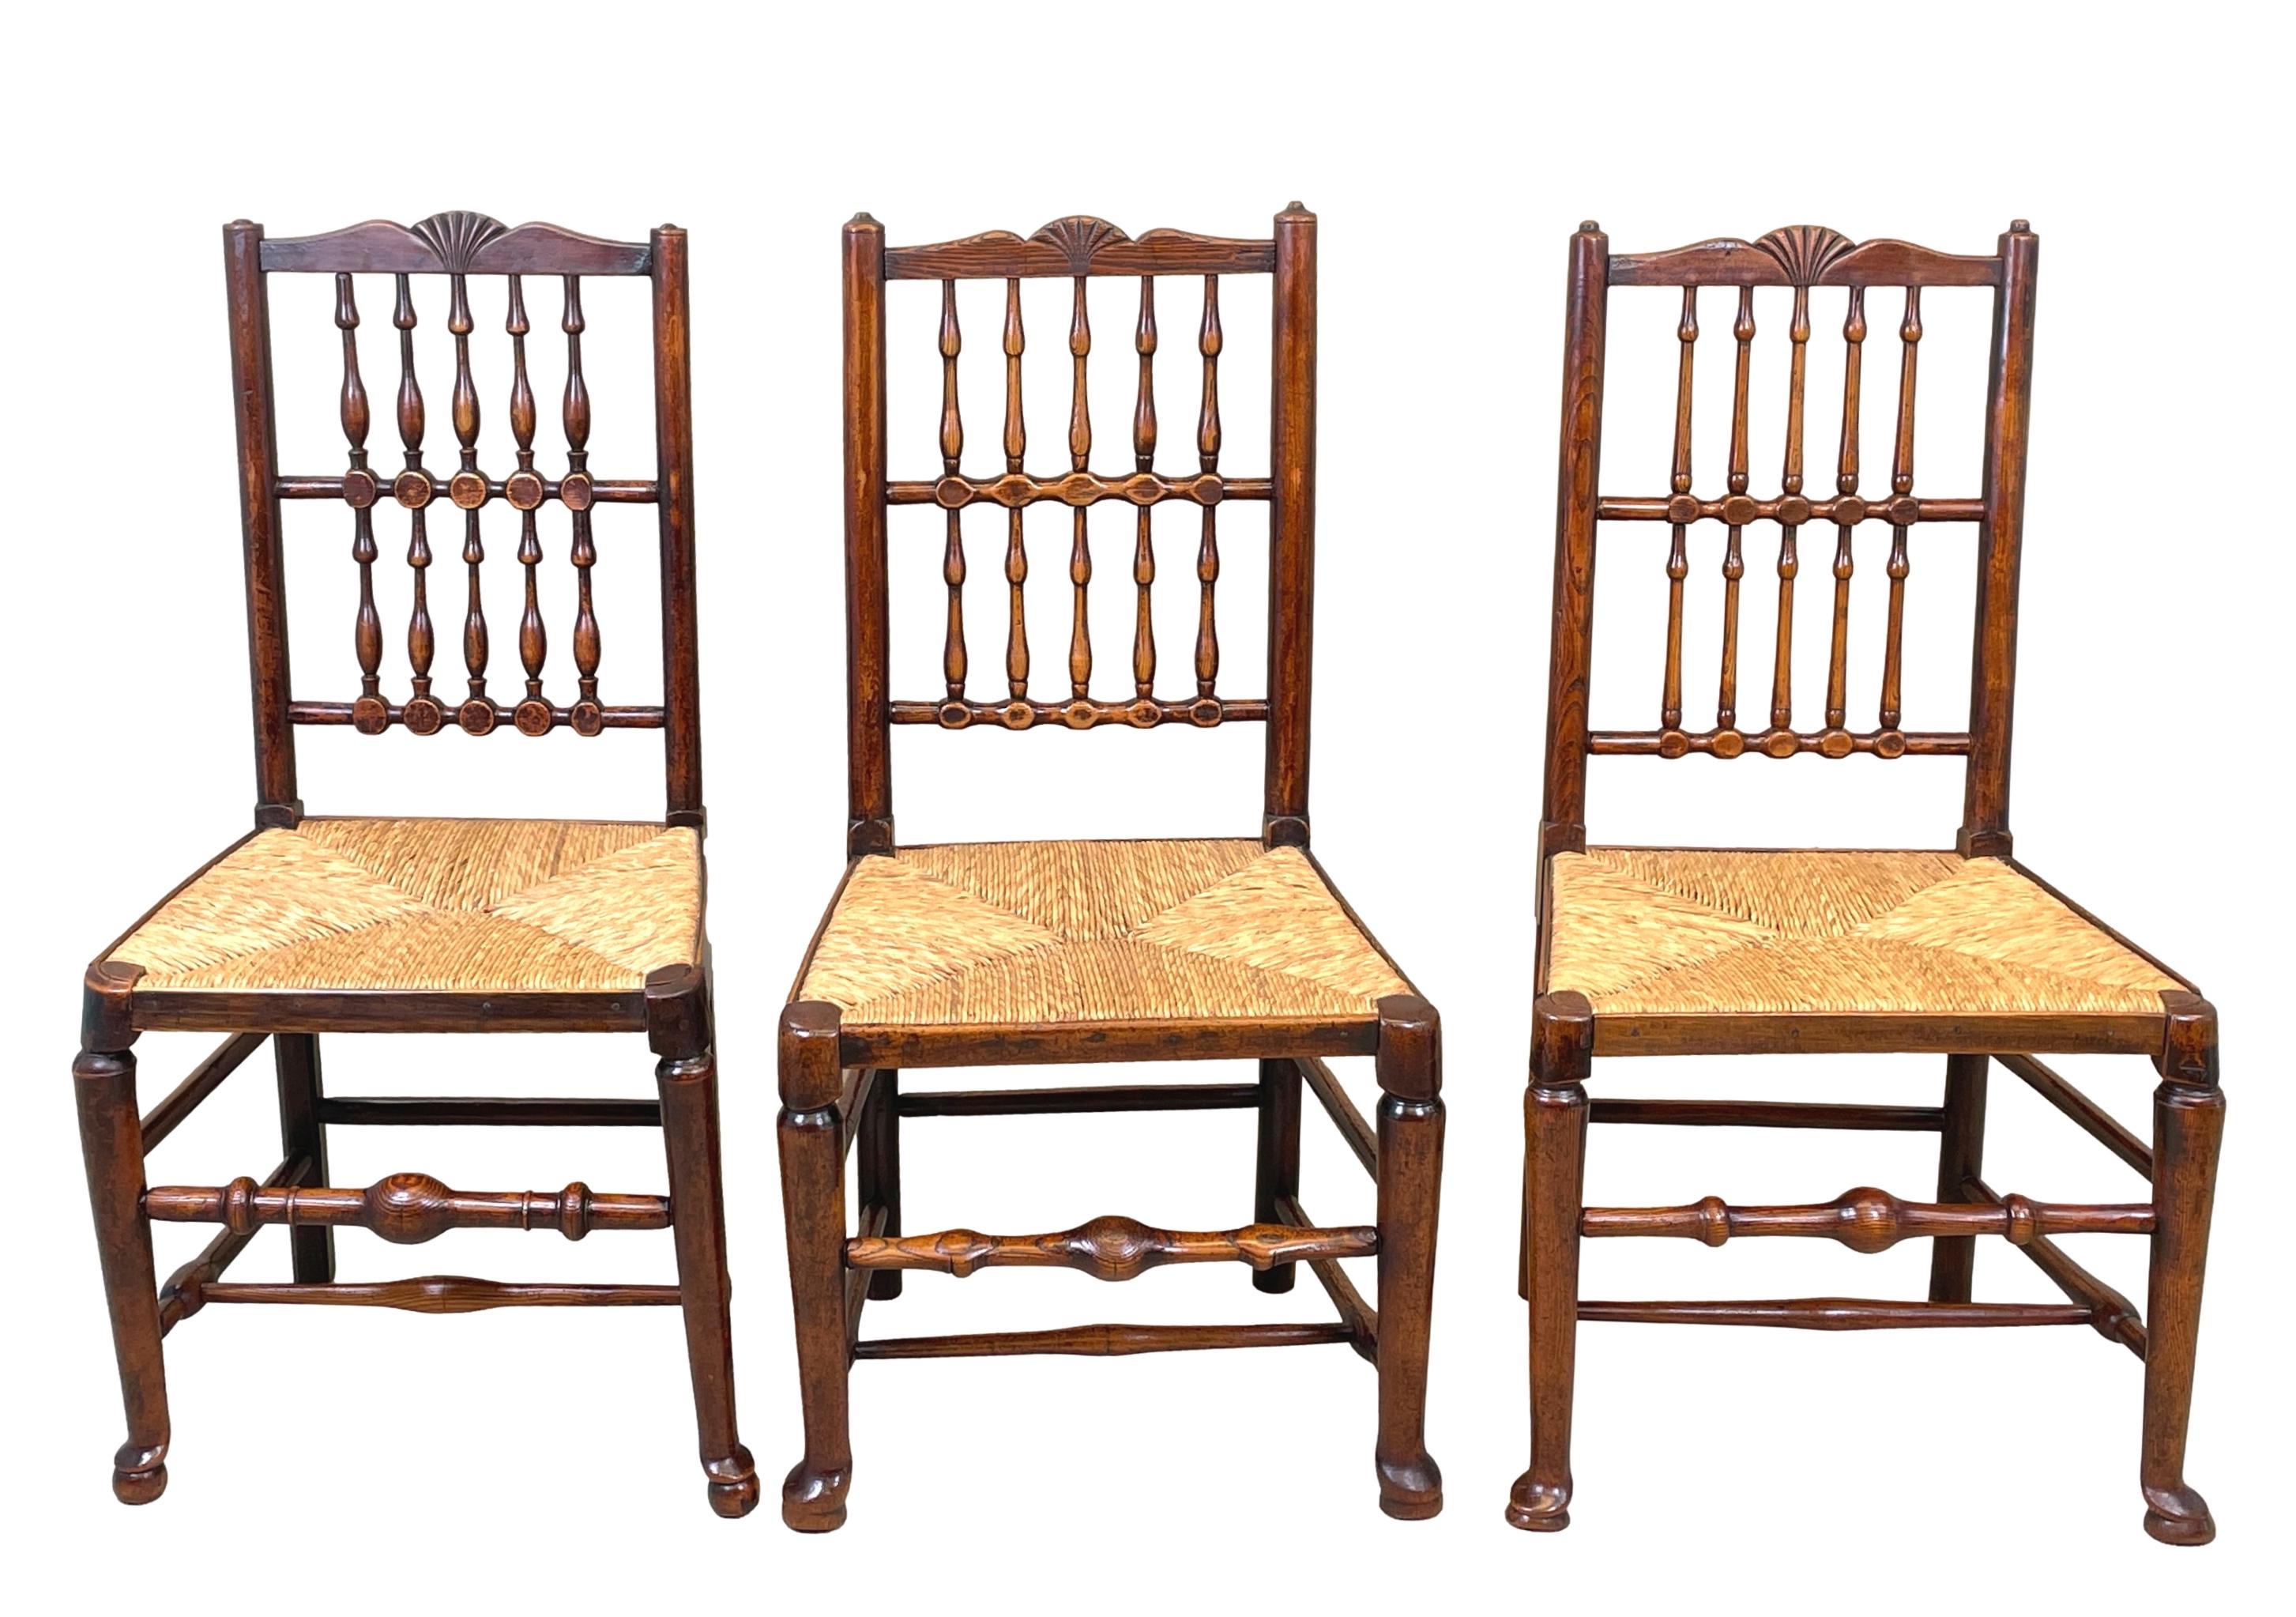 A charming matched set of six early 19th century, English ash and elm, country farmhouse design, dining chairs having elegant double row of spindles with central carved fan to backs over rushed seats raised on turned legs united by turned